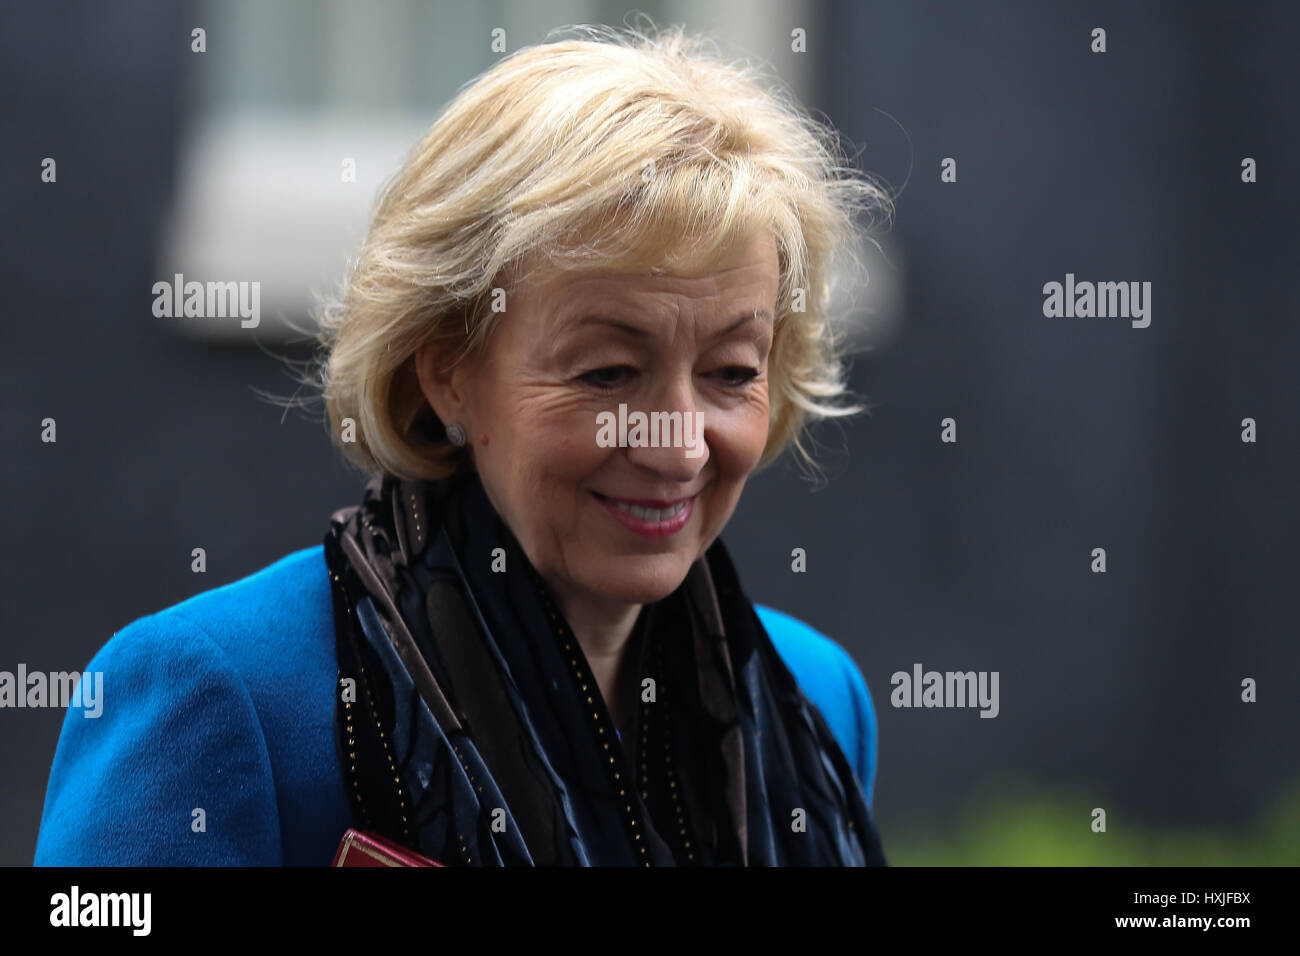 Downing Street, London, UK. 29th Mar, 2017. Andrea Leadsom Secretary of State for Environment Food and Rural Affairs leaves after the weekly Cabinet meeting at number 10 Downing street on the day the Prime Minister will will officially notify the EU of Britain's intention to leave and will make a statement to the House of Commons following the PMQs on Brexit. Credit: Dinendra Haria/Alamy Live News Stock Photo